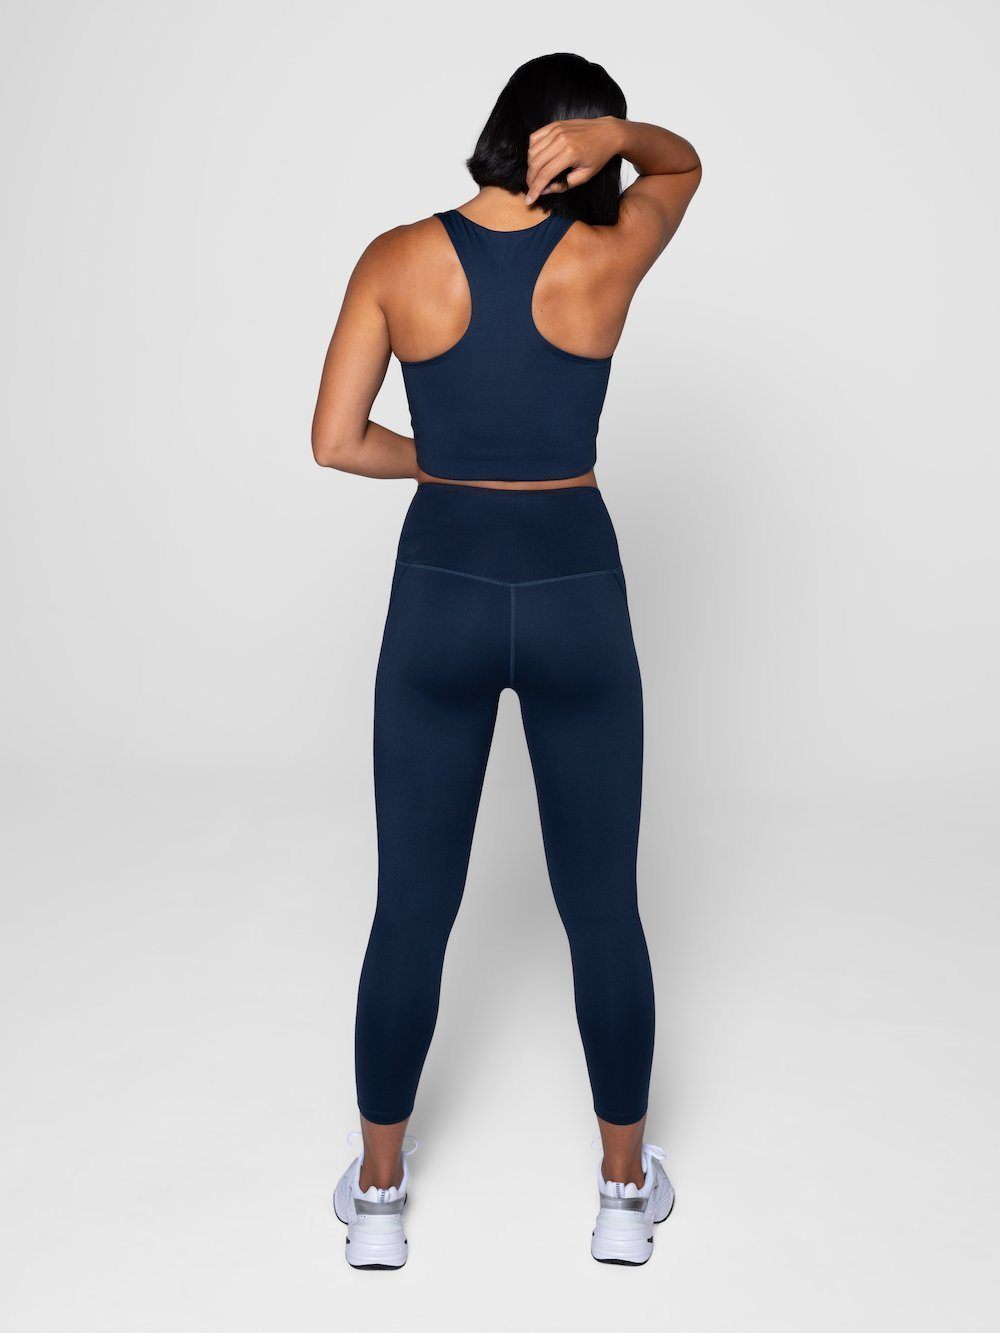 Girlfriend Collective W's Compressive Legging - Normal - Made From Recycled Plastic Bottles Midnight Pants